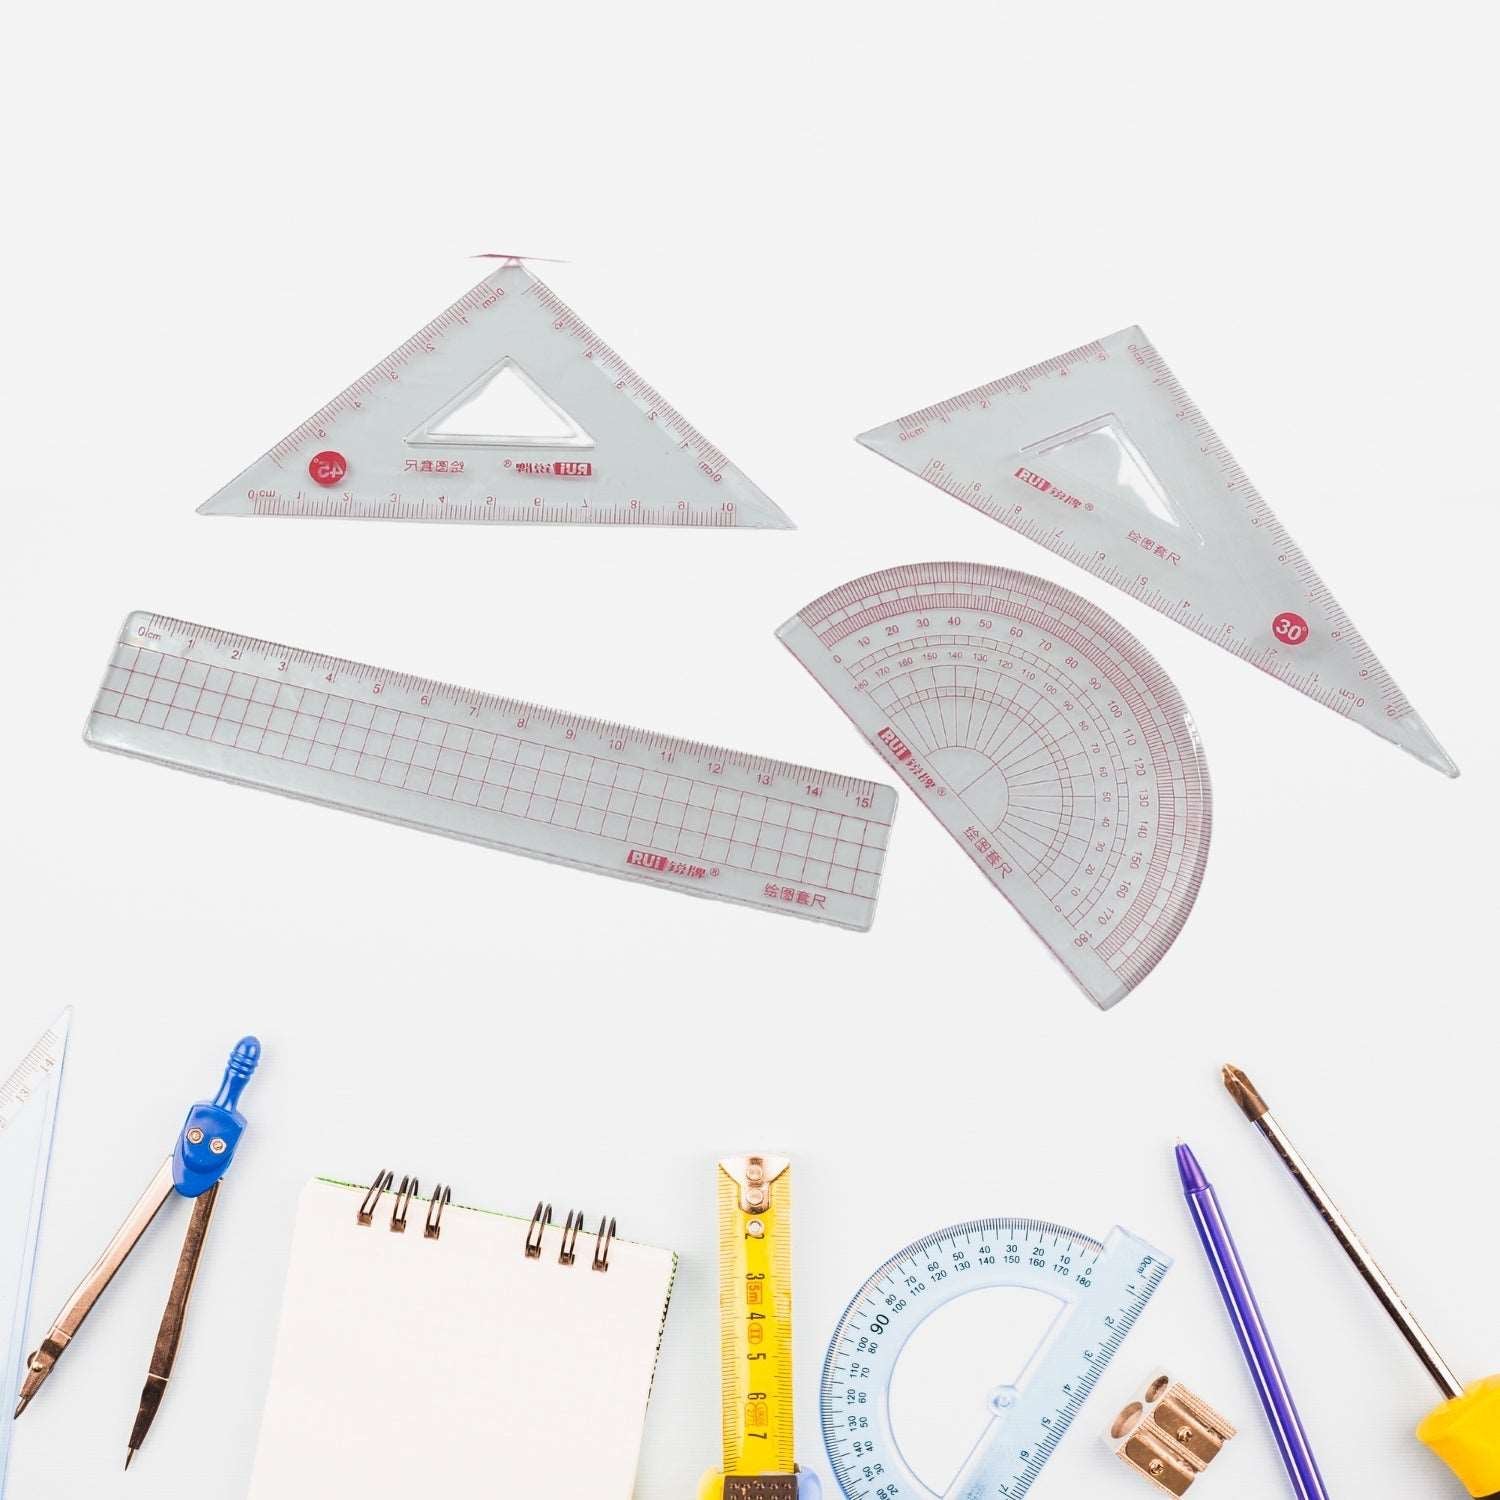 4 Pcs Math Set for Kids and Students, Plastic Geometry Set with Ruler, Protractor and Squares, School Supplies